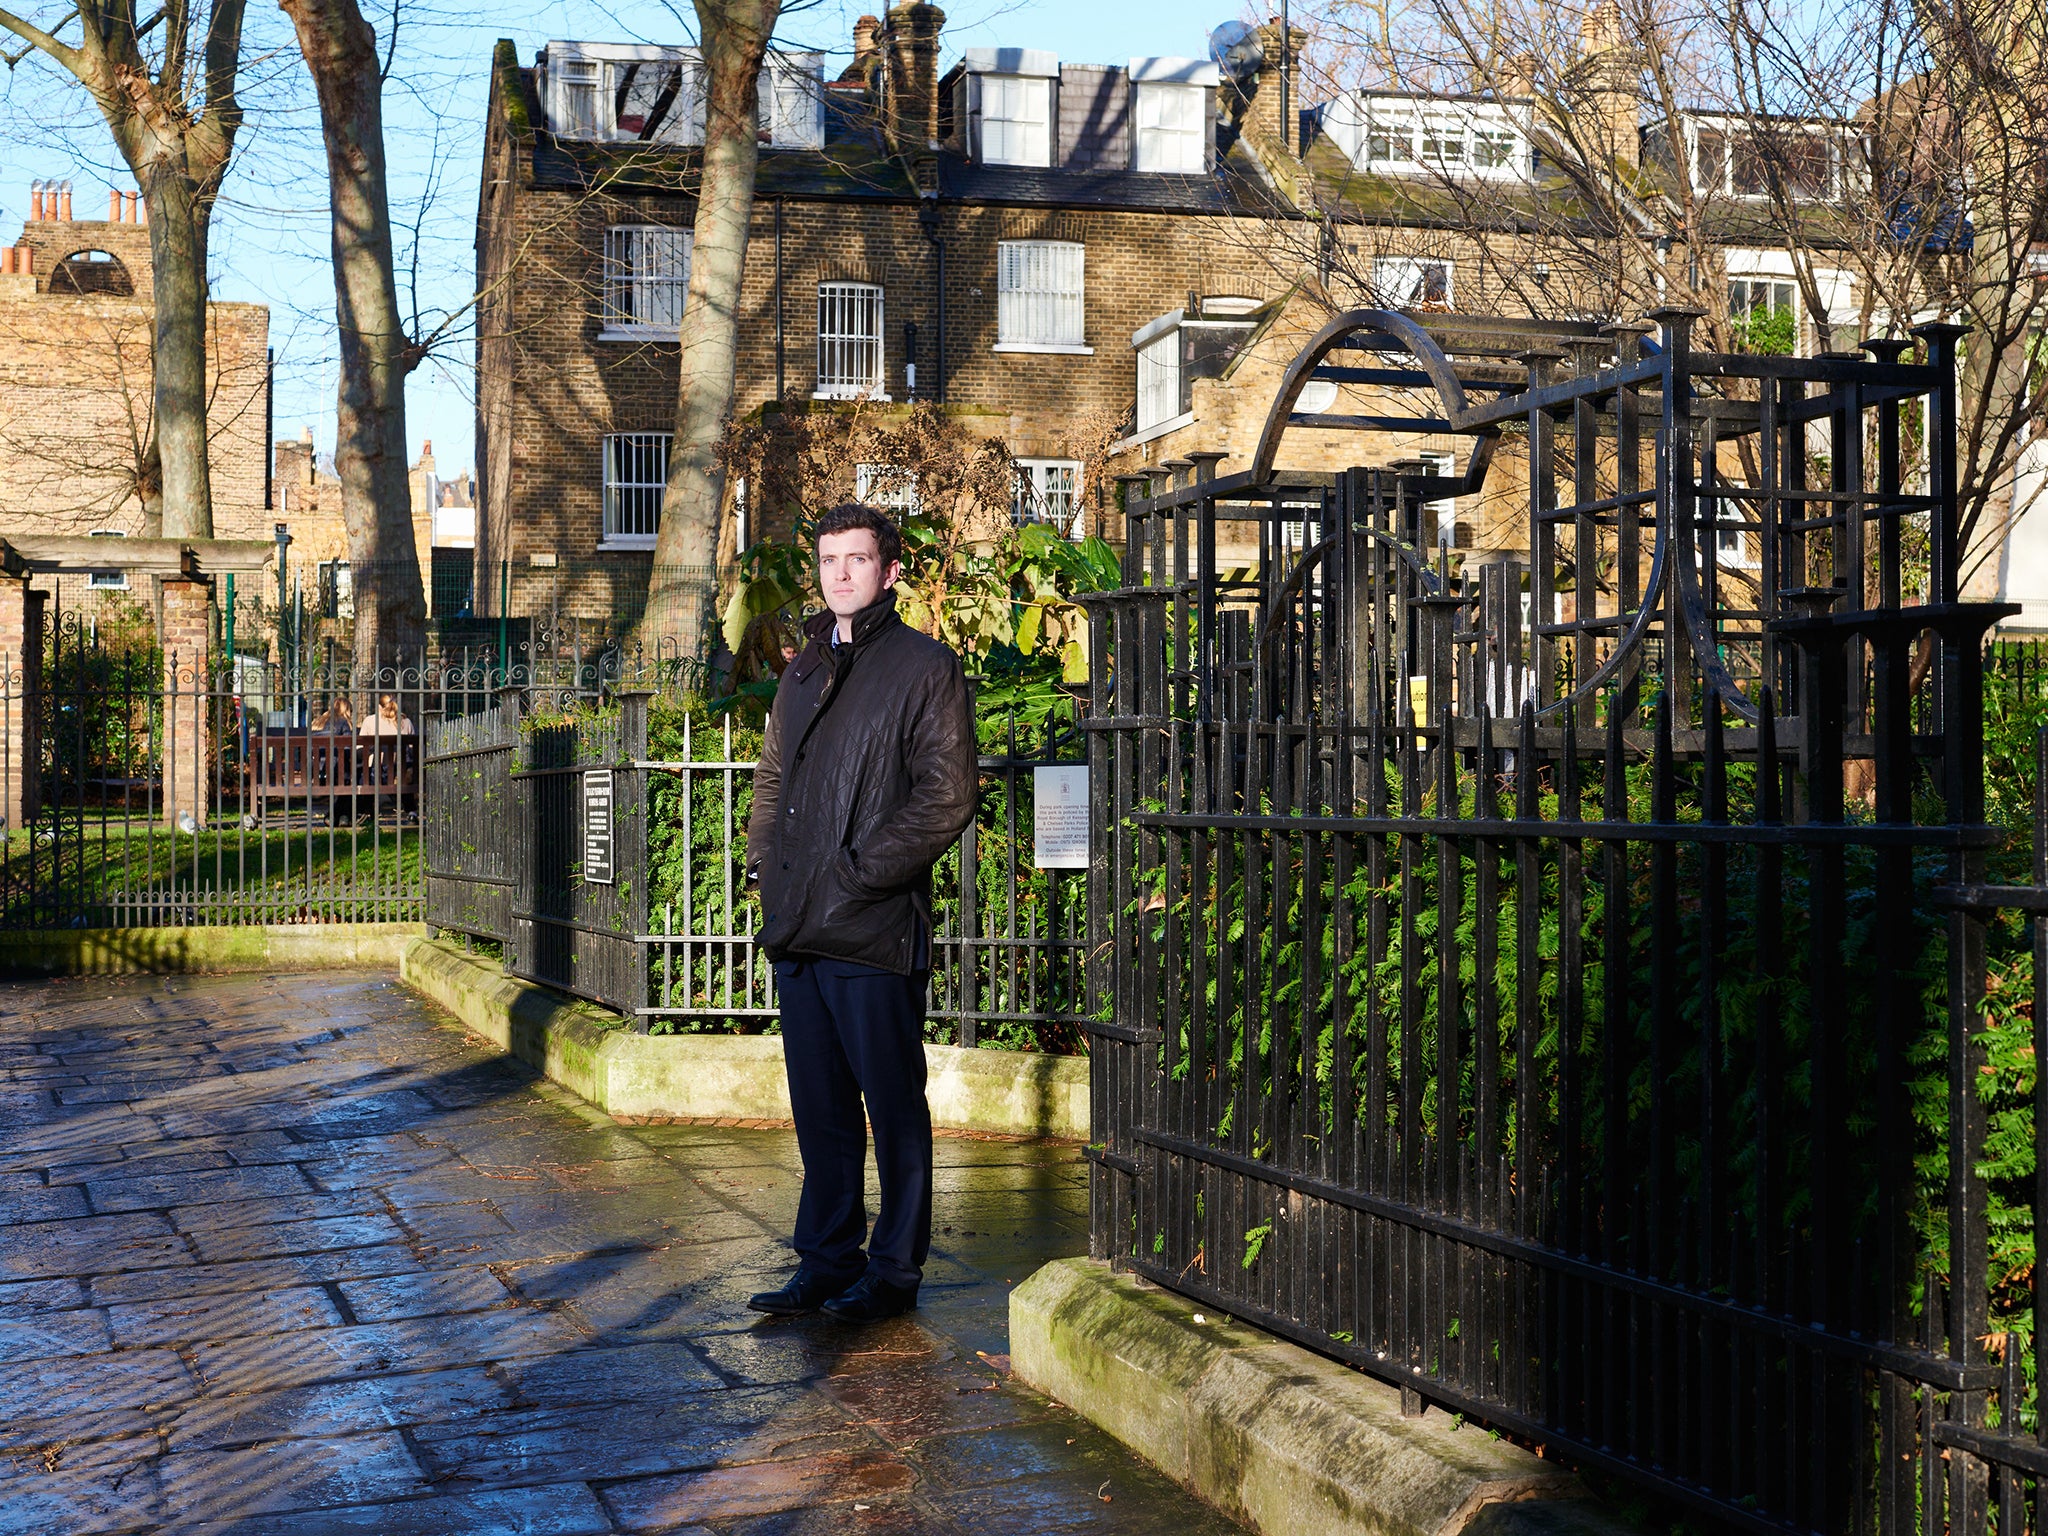 Ed Boord next to the park railings of a local park in Kensington where he found Pawel Koseda